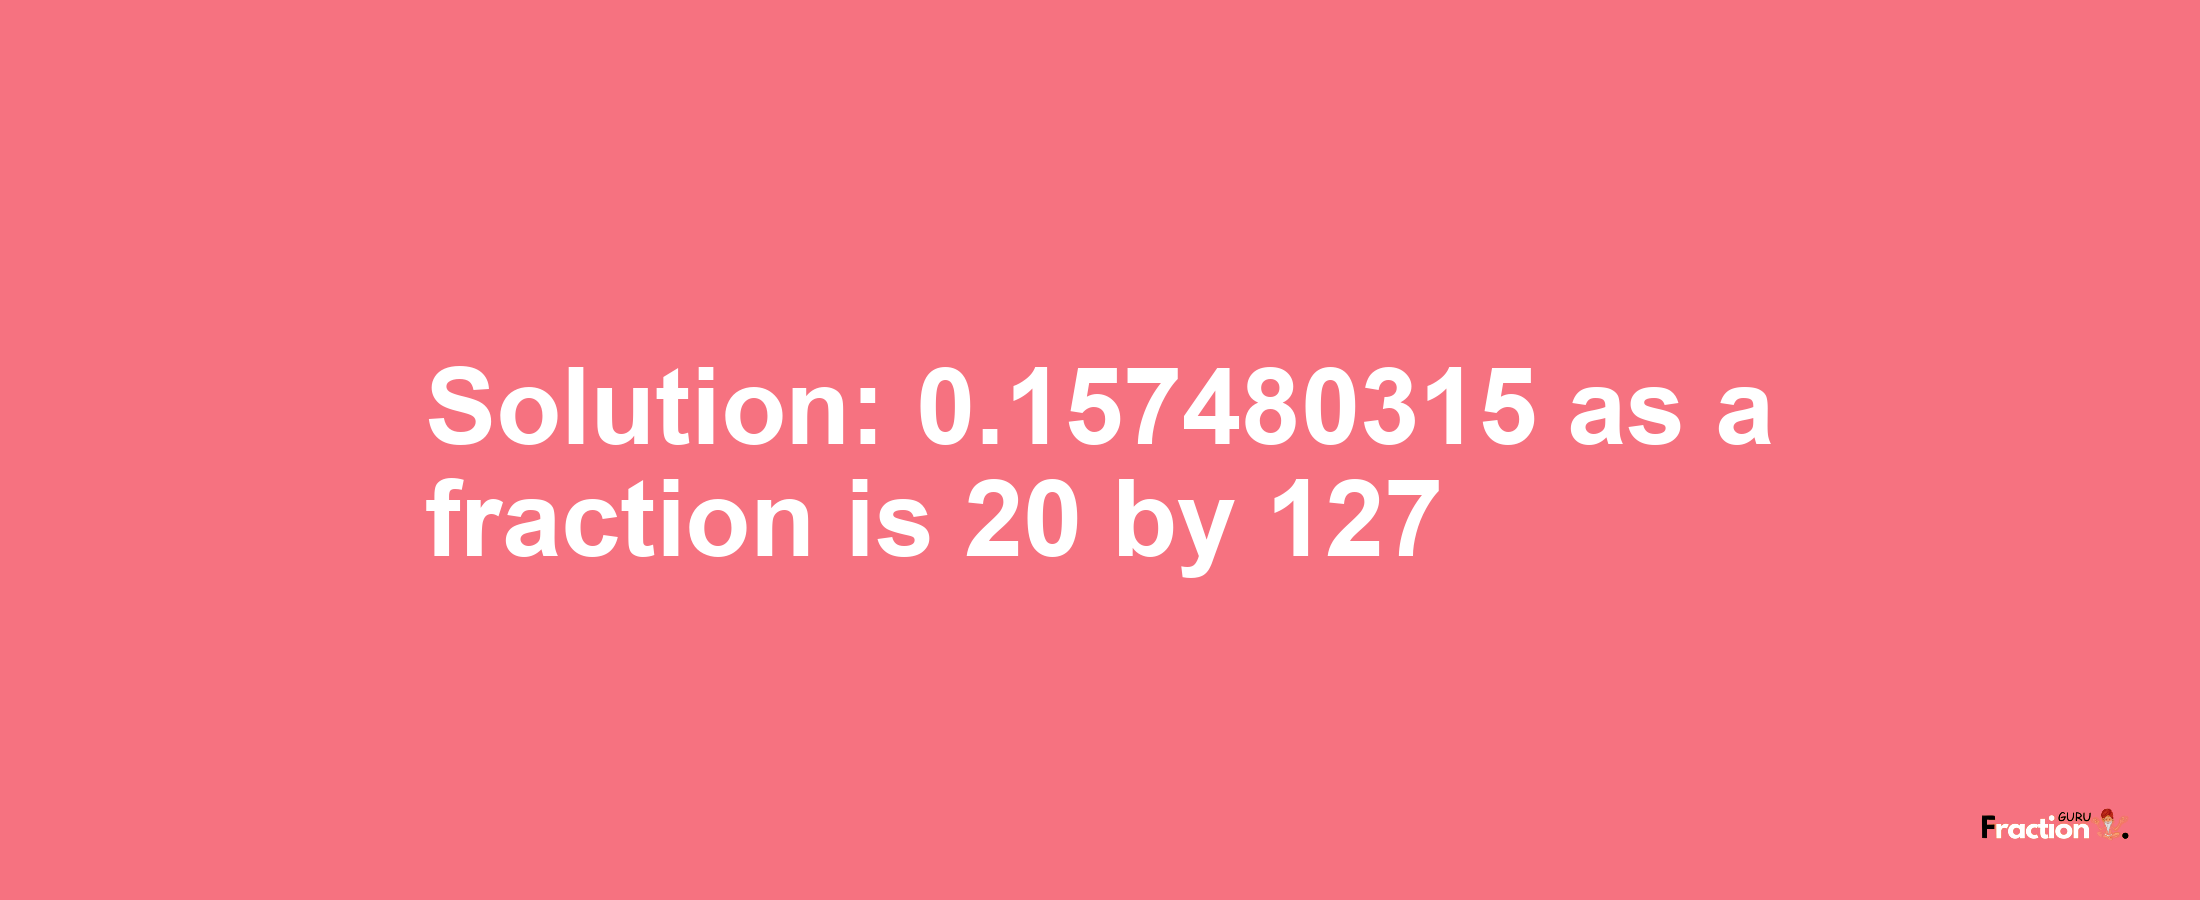 Solution:0.157480315 as a fraction is 20/127